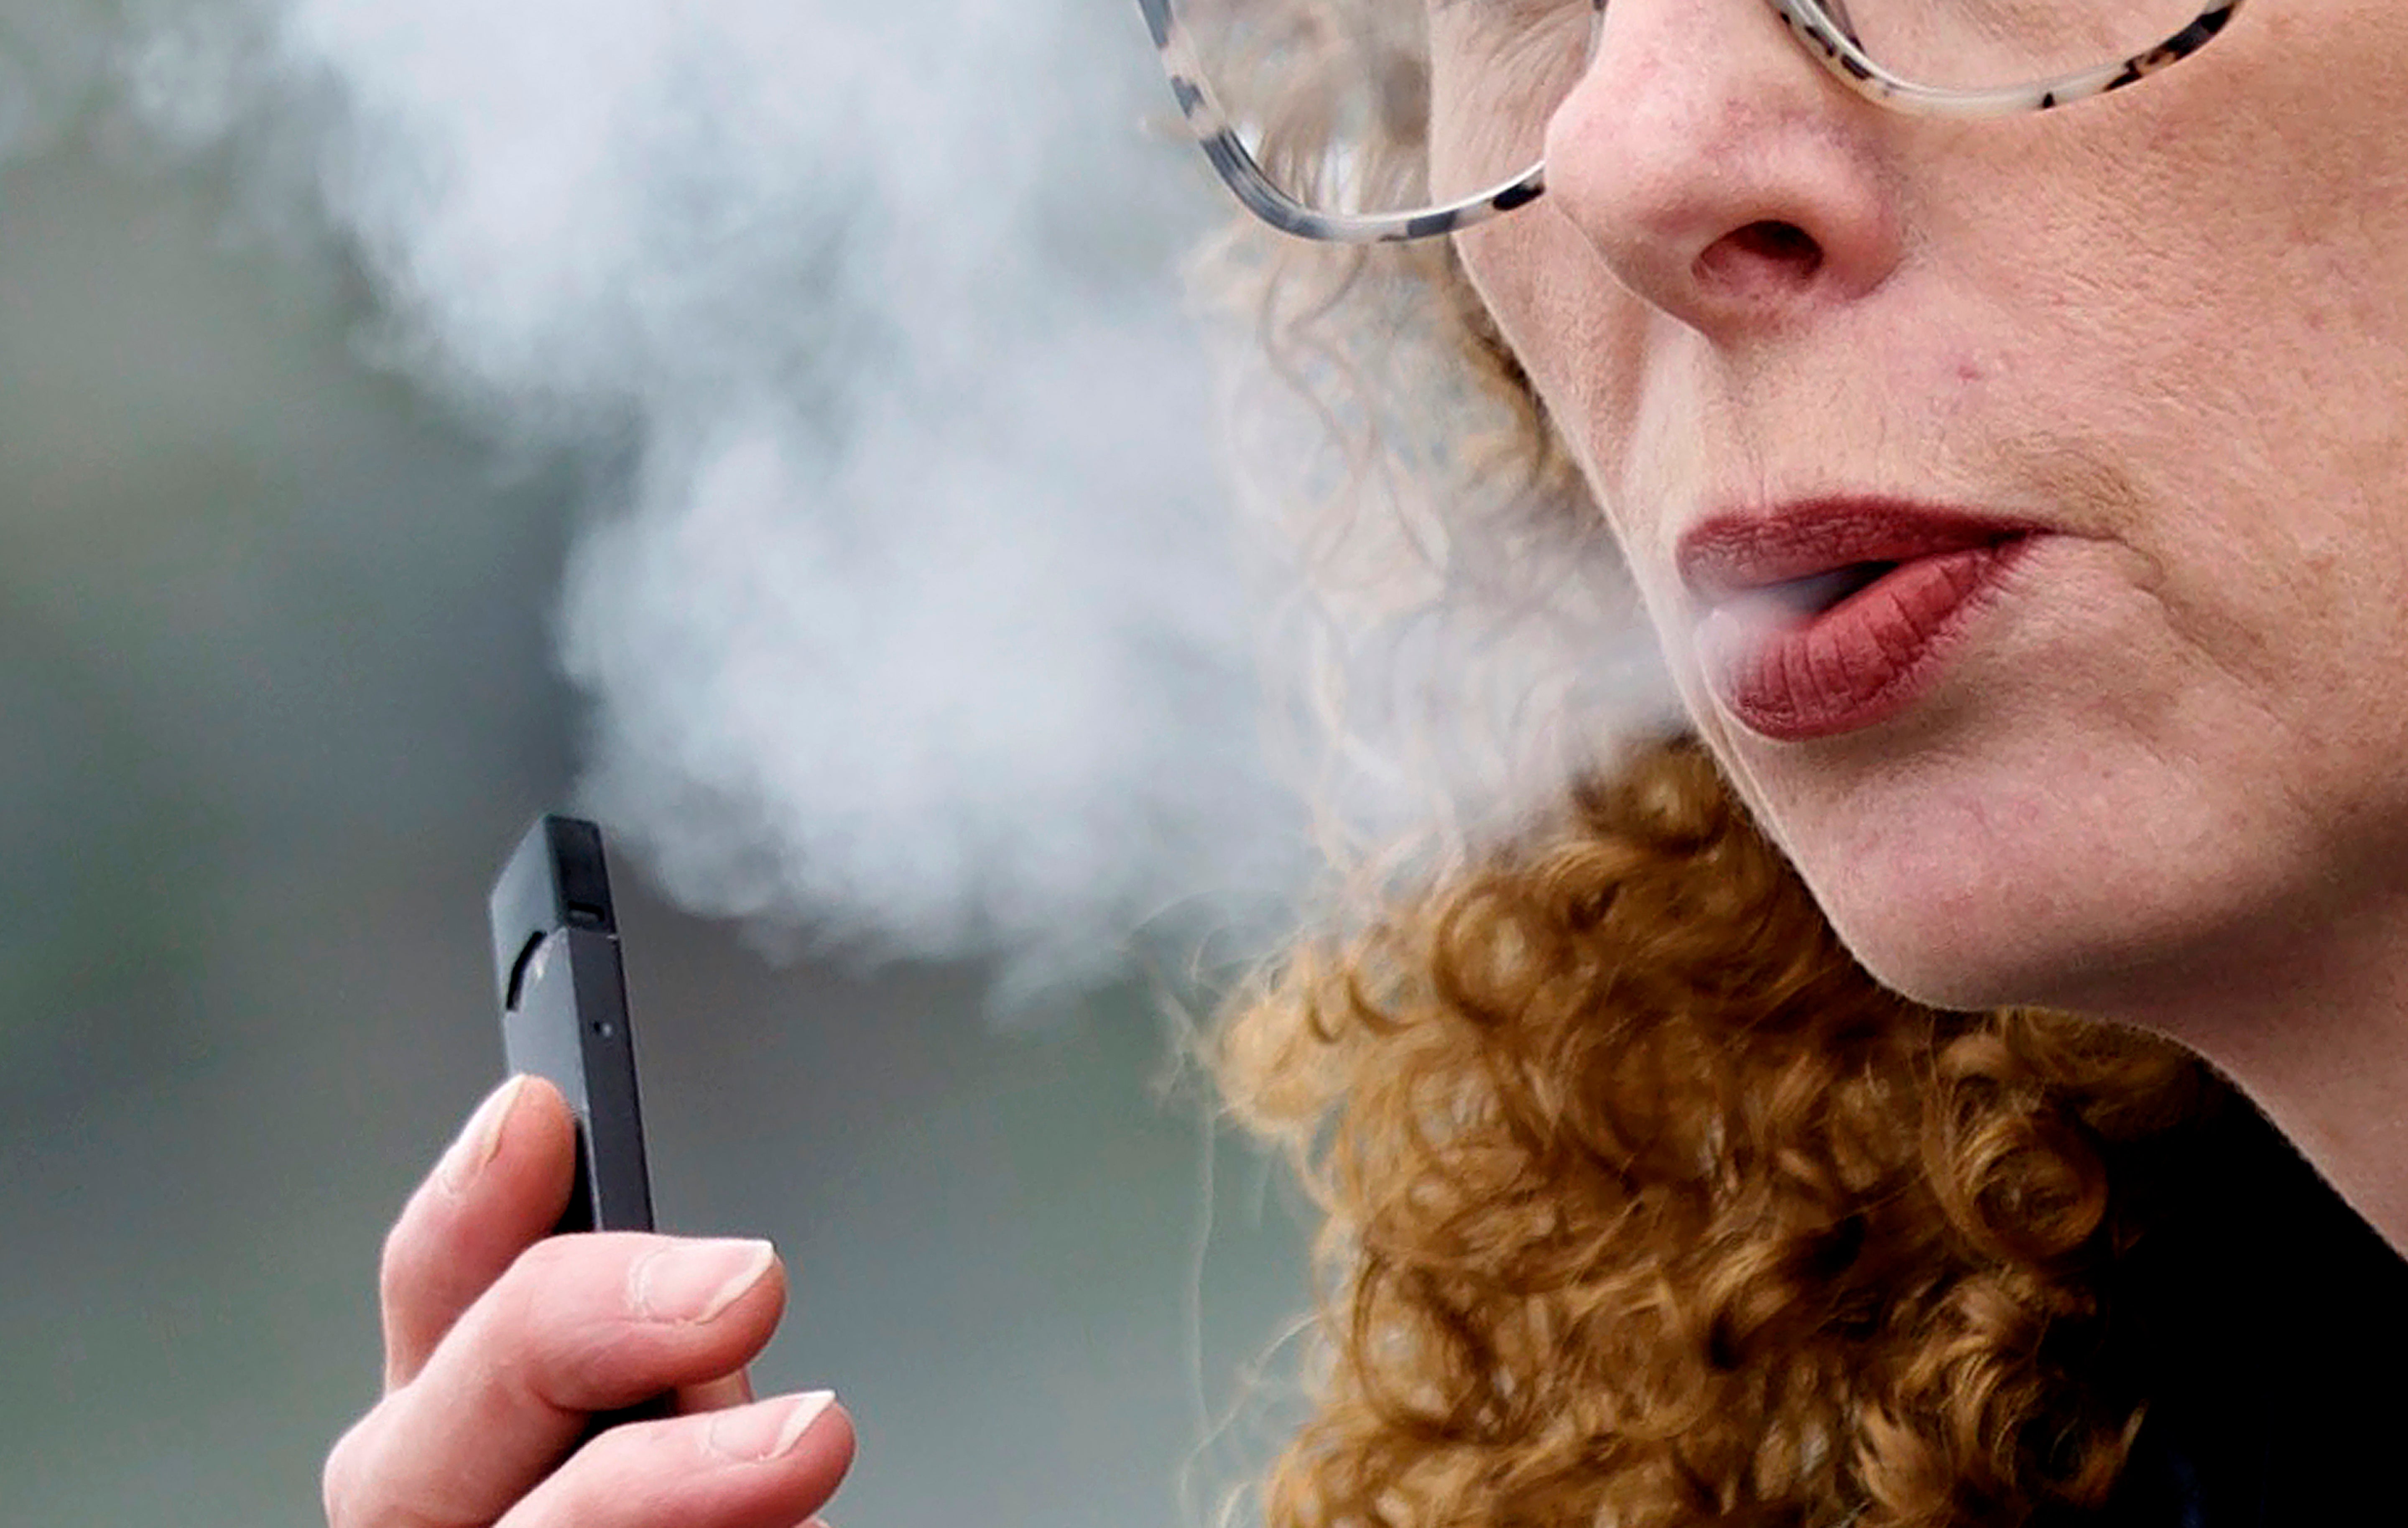 Researchers are concerned that vaping can cause inflammation which leads to cancer